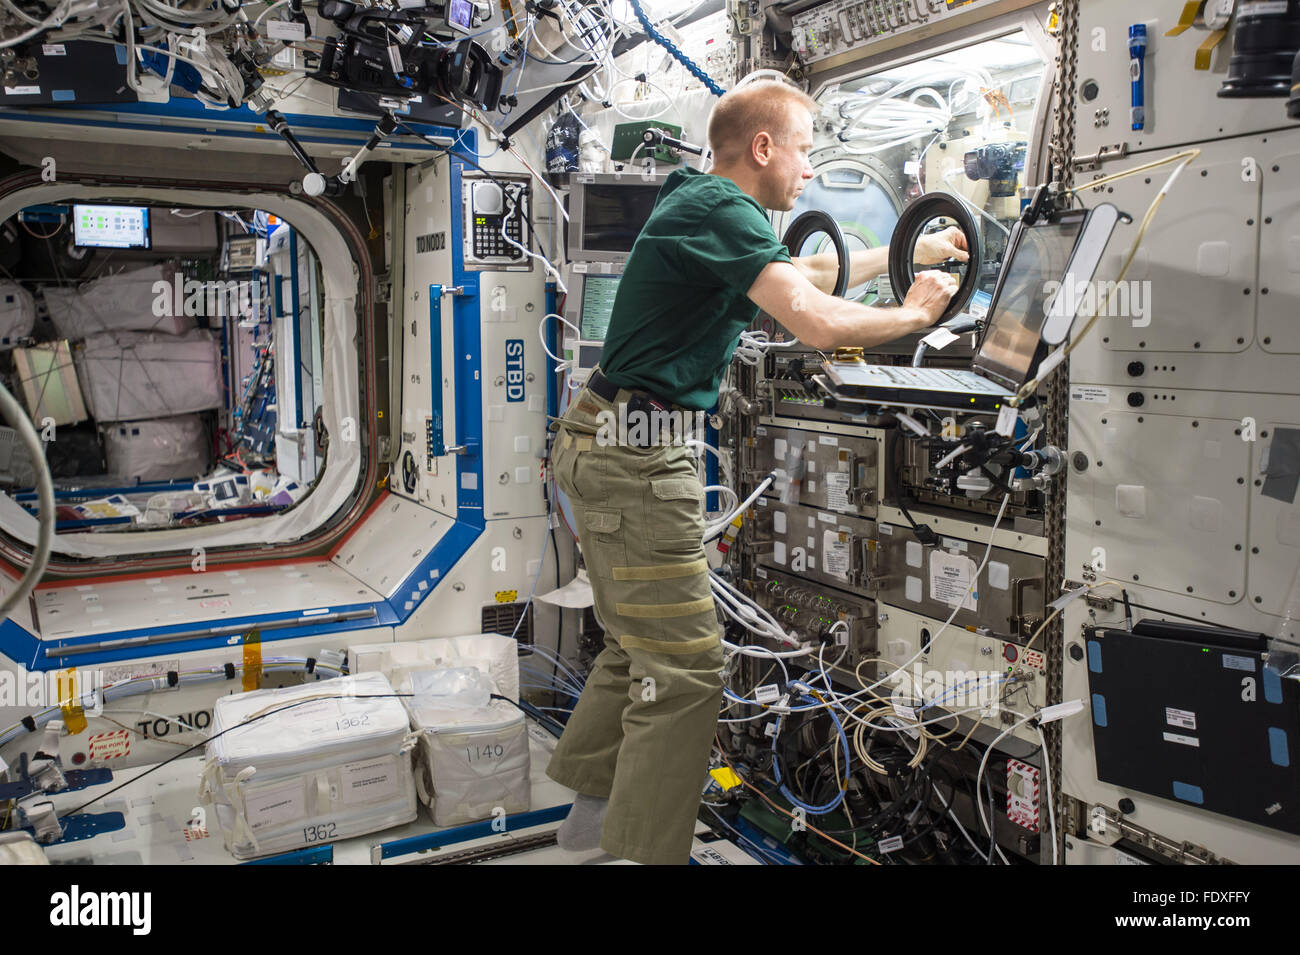 NASA astronaut Tim Kopra sets up hardware for the Burning and Suppression of Solids Ð Milliken, or BASS-M, experiment aboard the International Space Station January 27, 2016 in Earth Orbit. The BASS-M investigation tests flame-retardant cotton fabrics to determine how well they resist burning in microgravity. Stock Photo